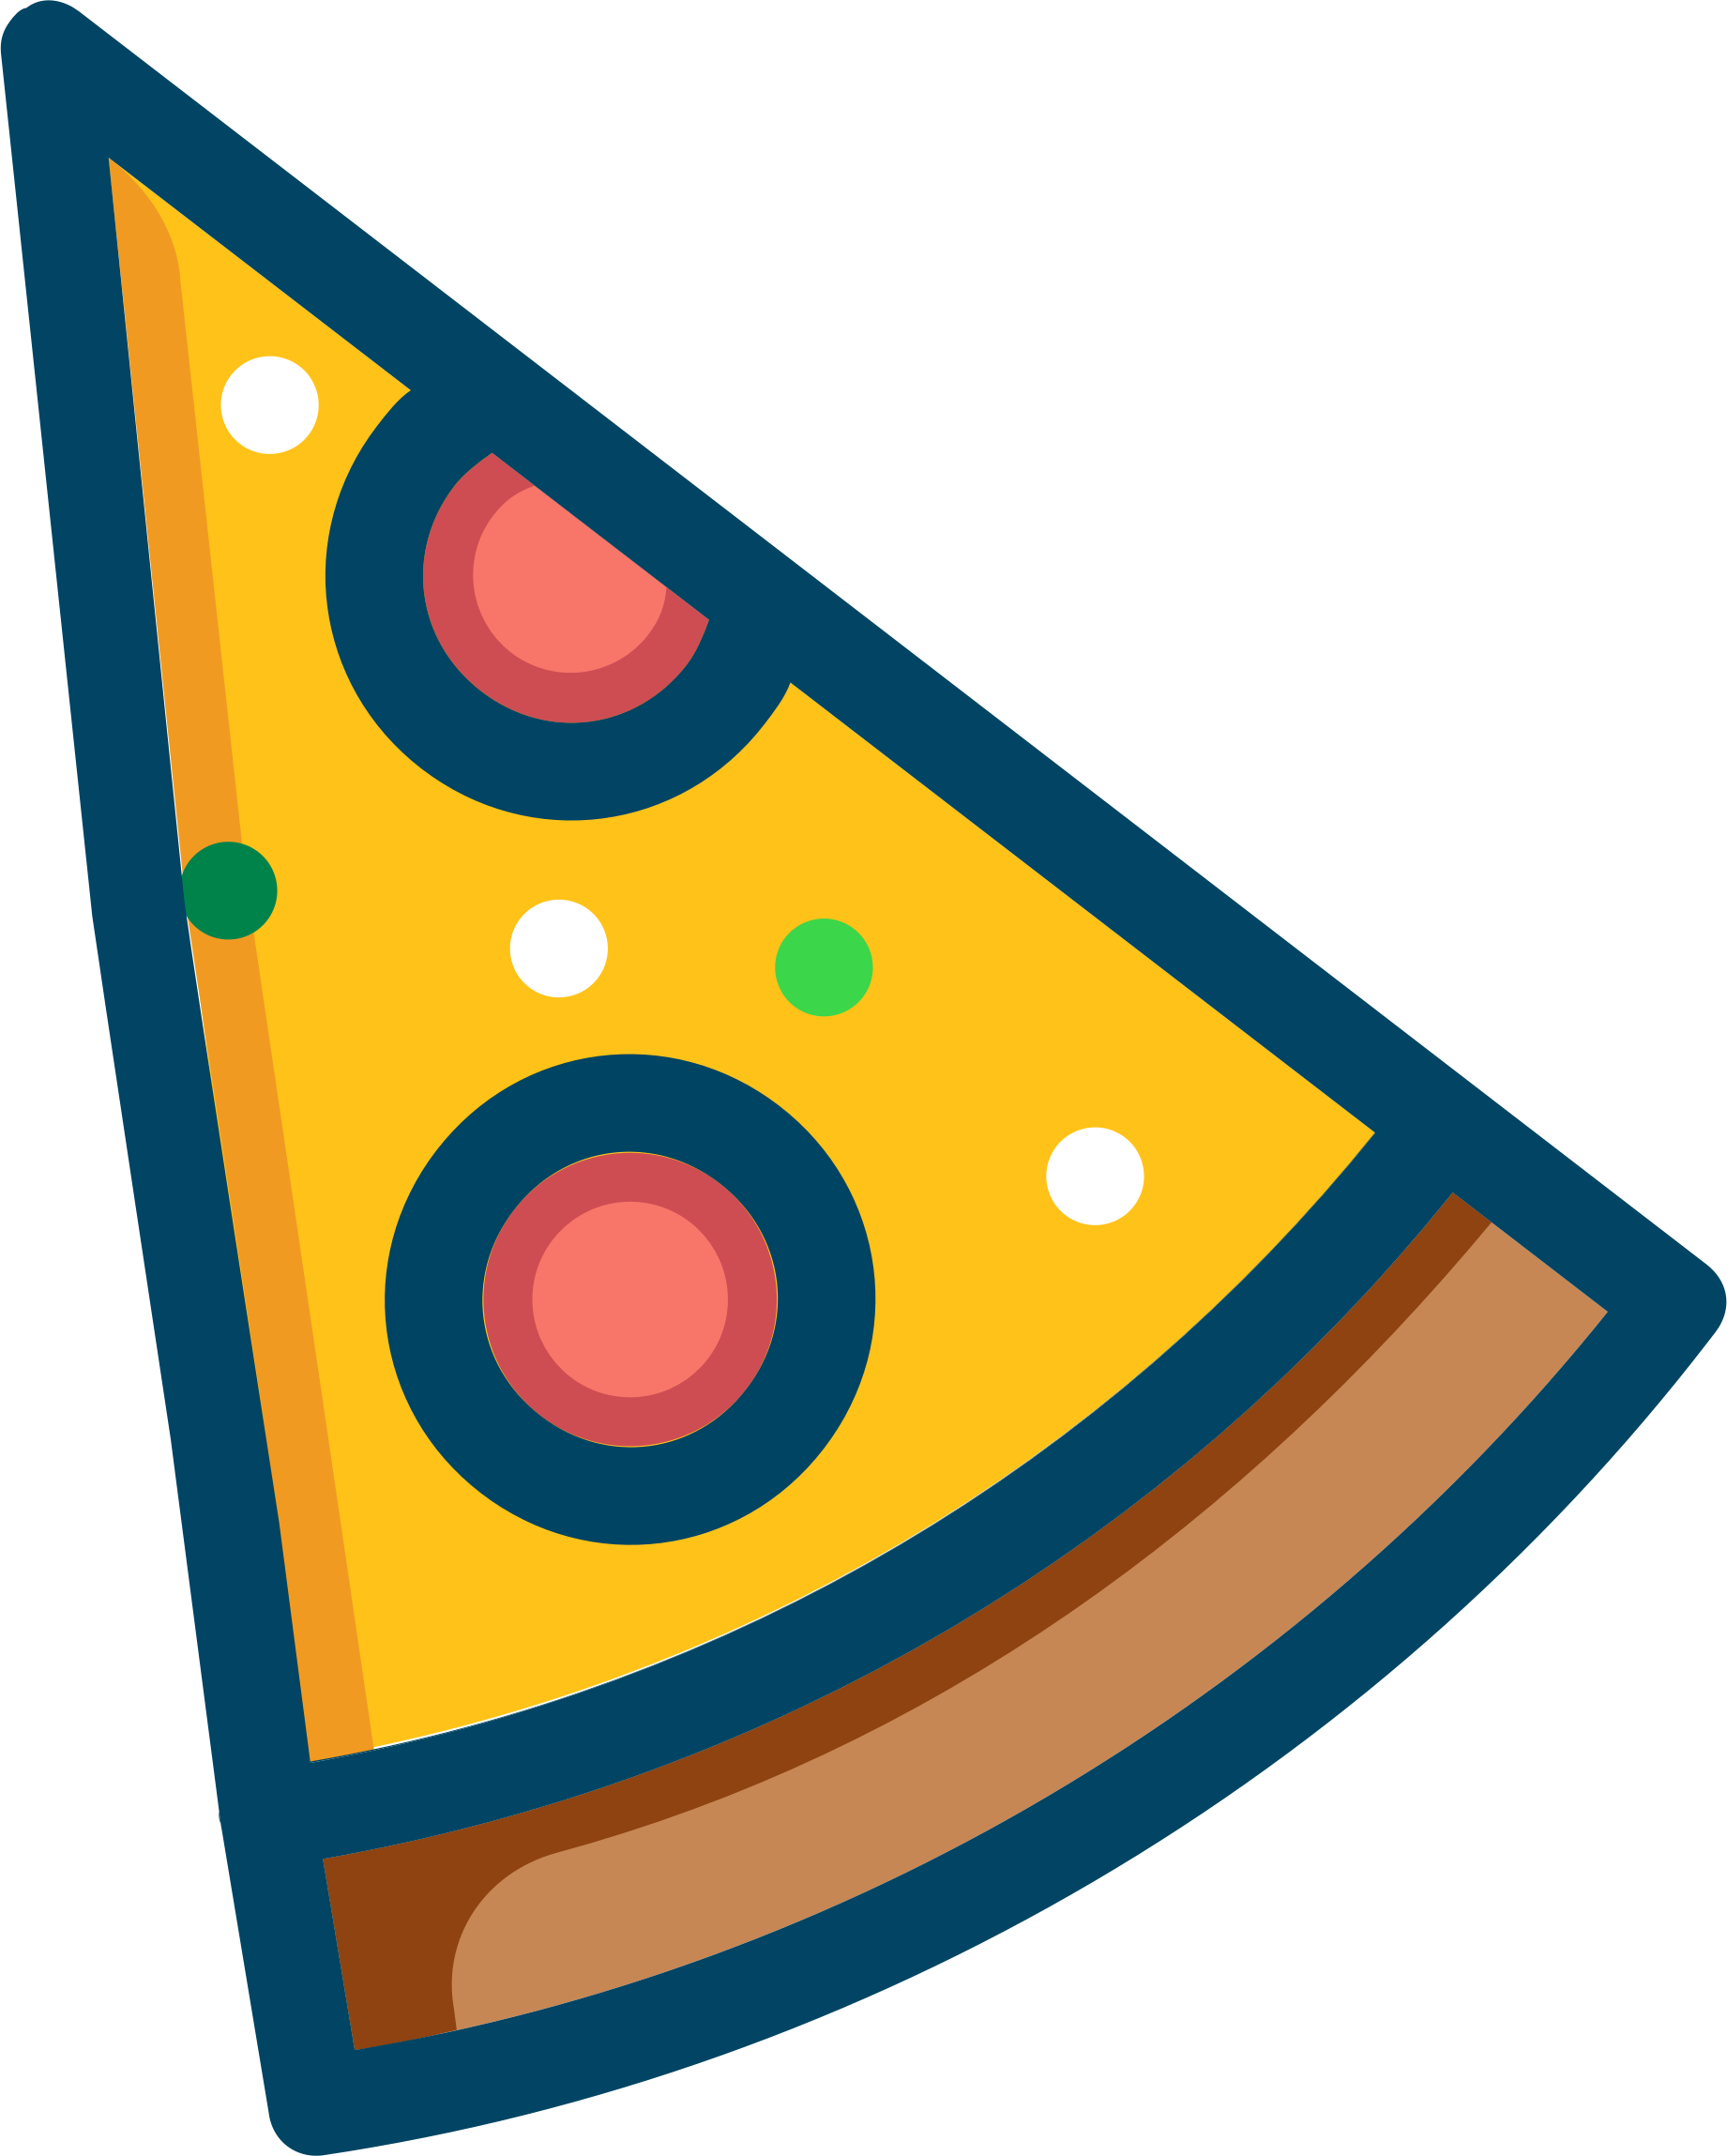 Pizza clipart pepperoni pizza. Big image png